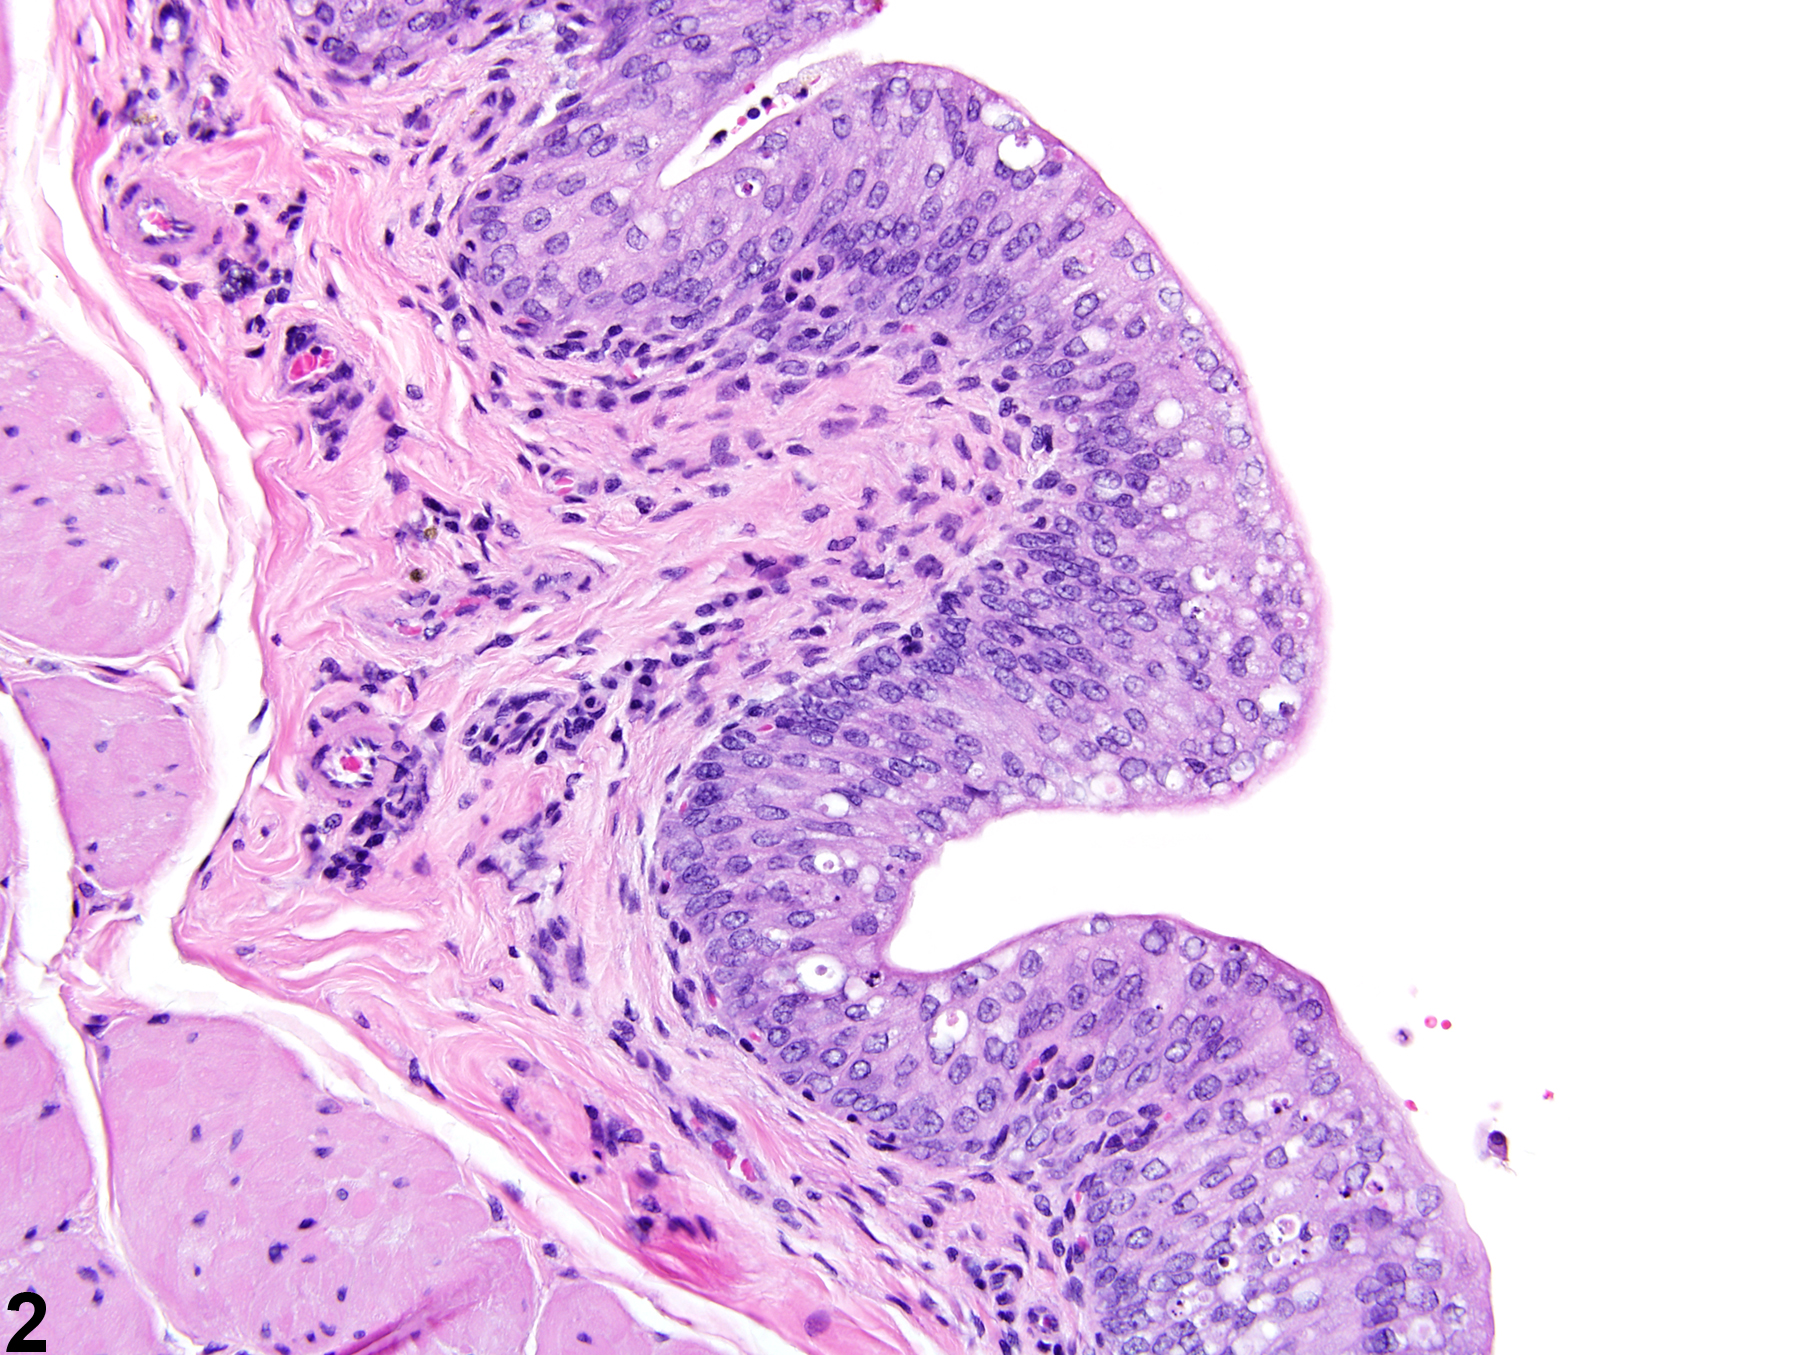 Image of vacuolization, cytoplasmic in the urinary bladder from a female Harlan Sprague-Dawley rat in a chronic study